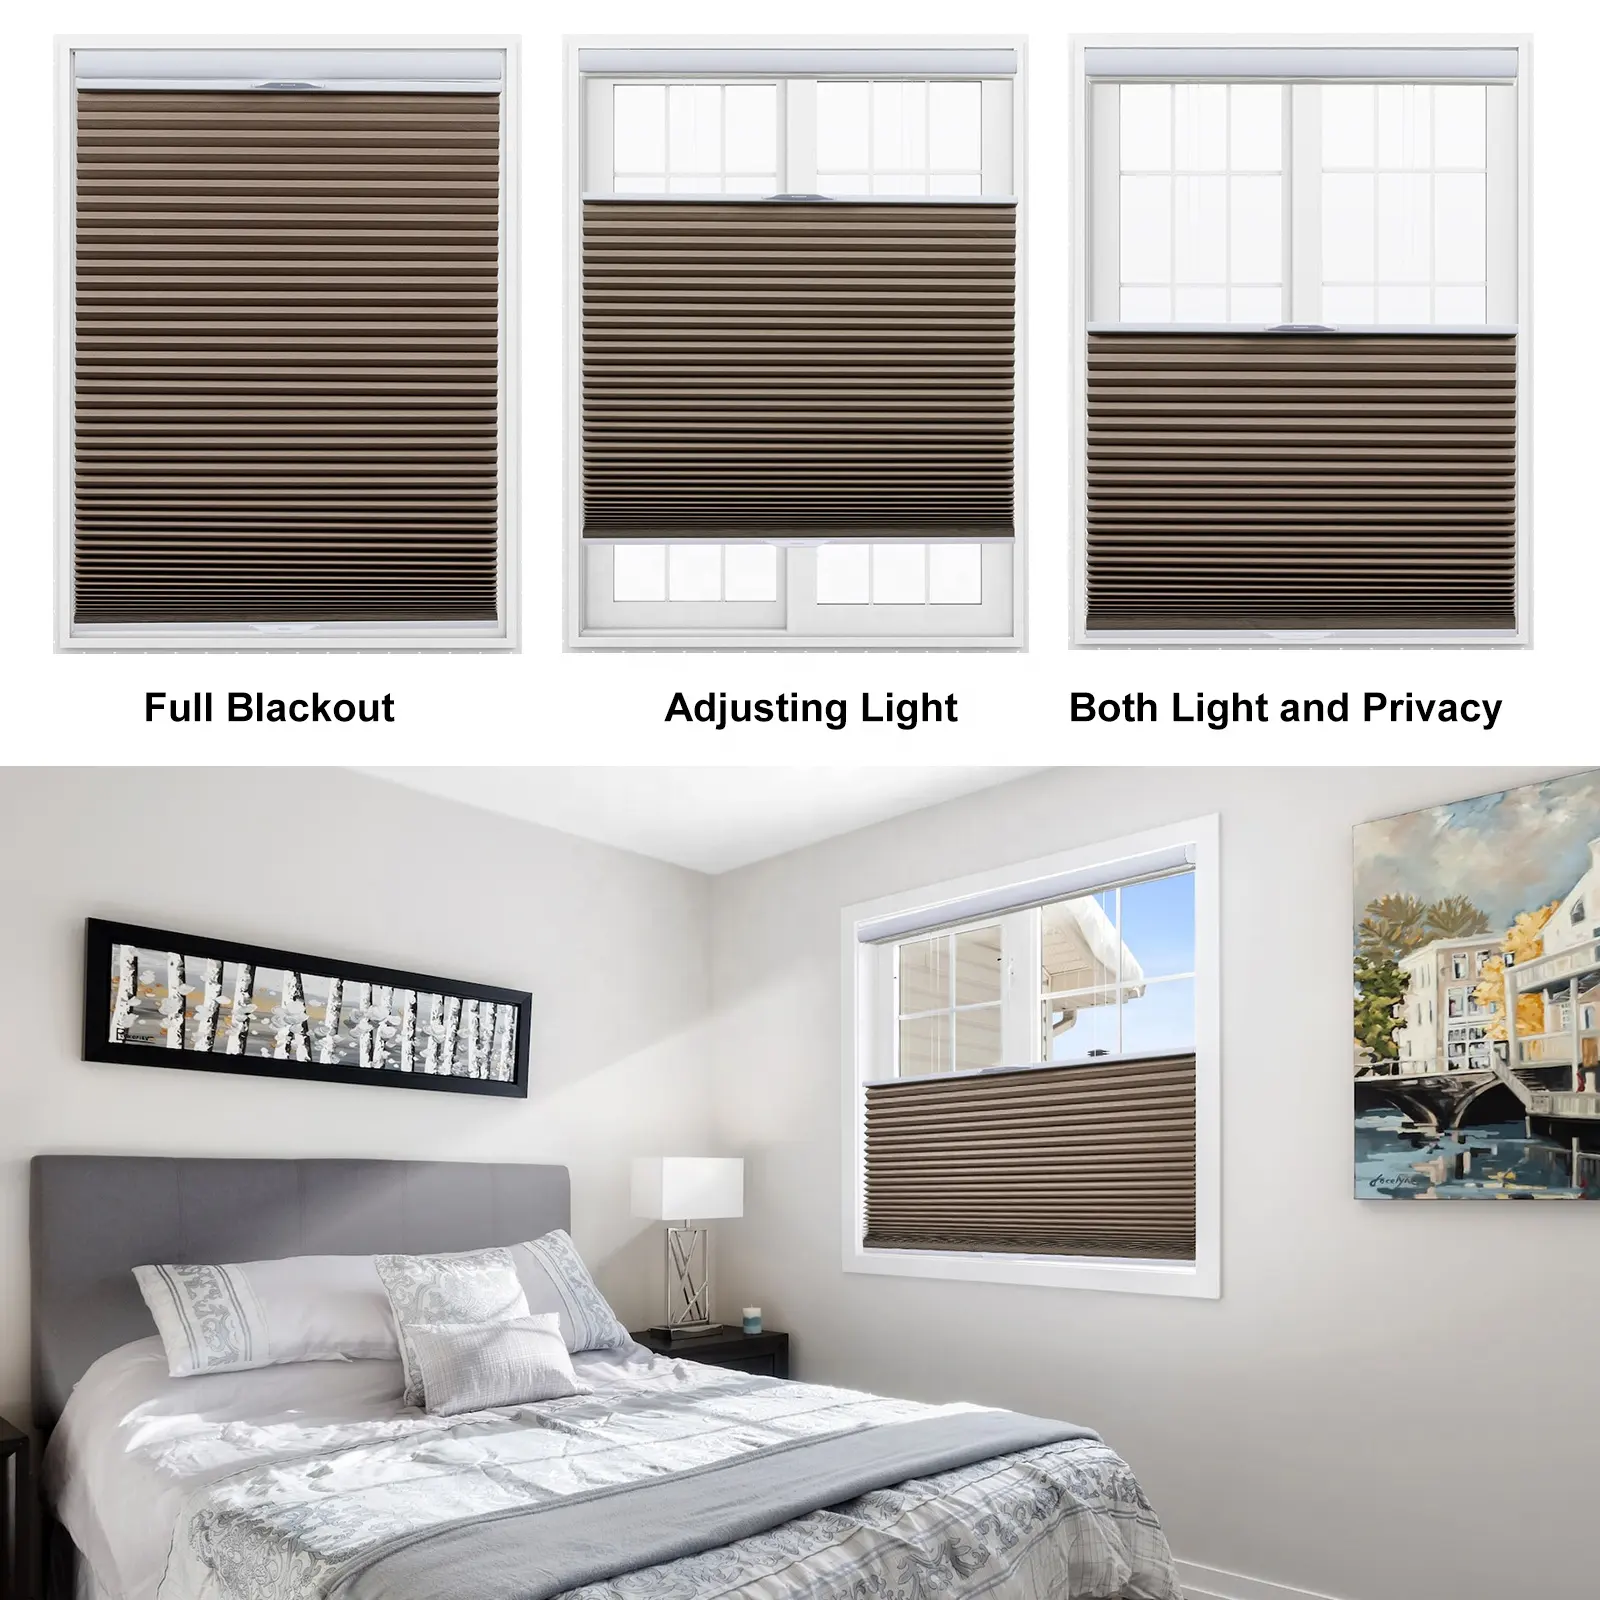 Factory Price Waterproof Honeycomb Blackout Blinds Cellular Shades Interior Design Window Curtain Blinds